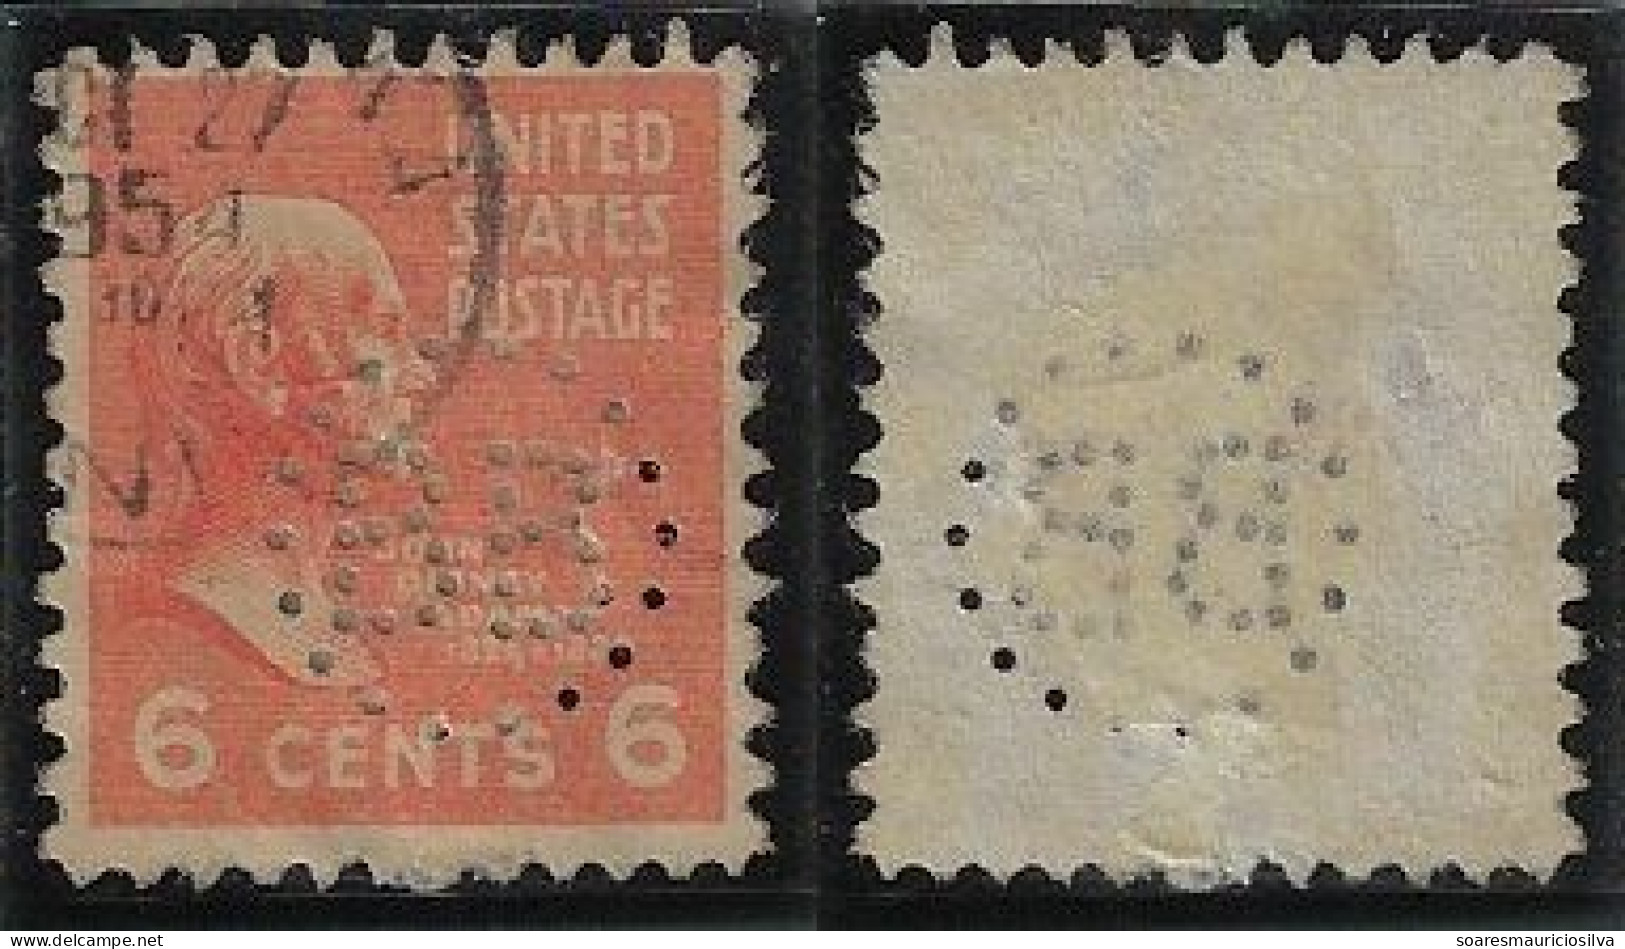 USA United States 1902/1954 Stamp With Perfin BB(Circle) By United States Rubber Company From Mishawaka Lochung Perfore - Zähnungen (Perfins)